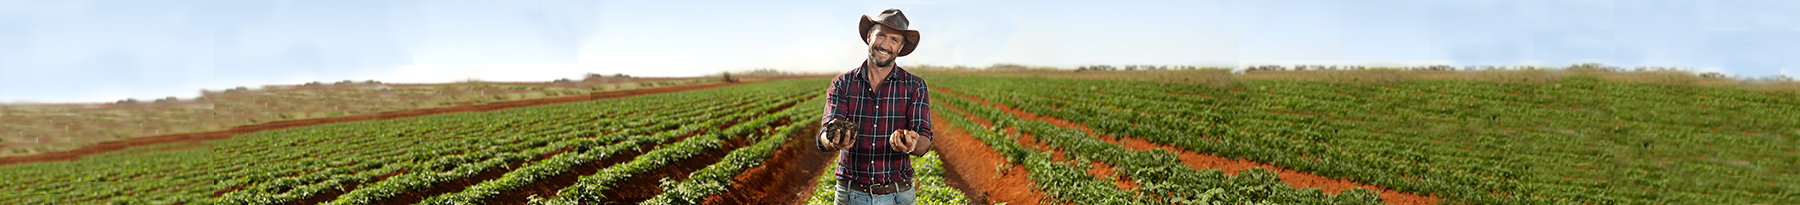 a farmer with handfulls of compost standing in a field of crops